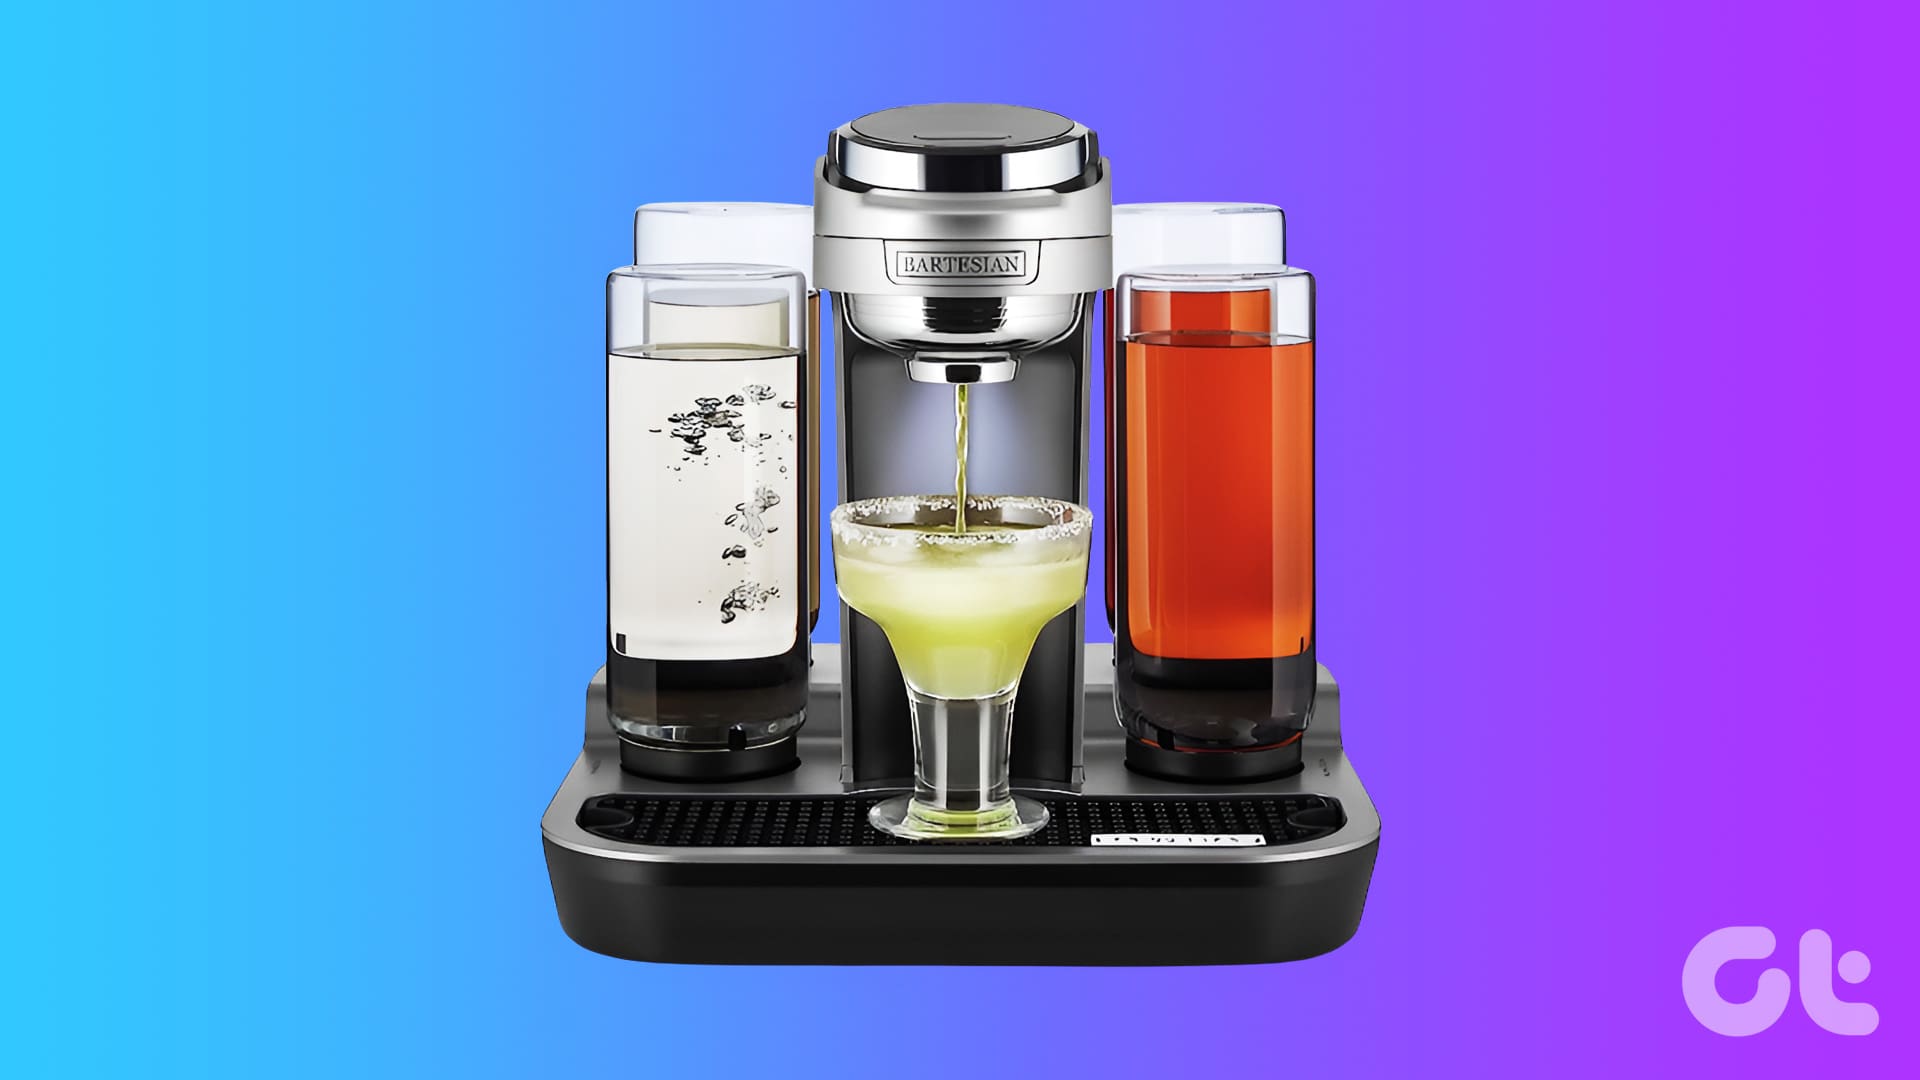 Here's Why Your Business Needs a Bartesian Professional Cocktail Machine